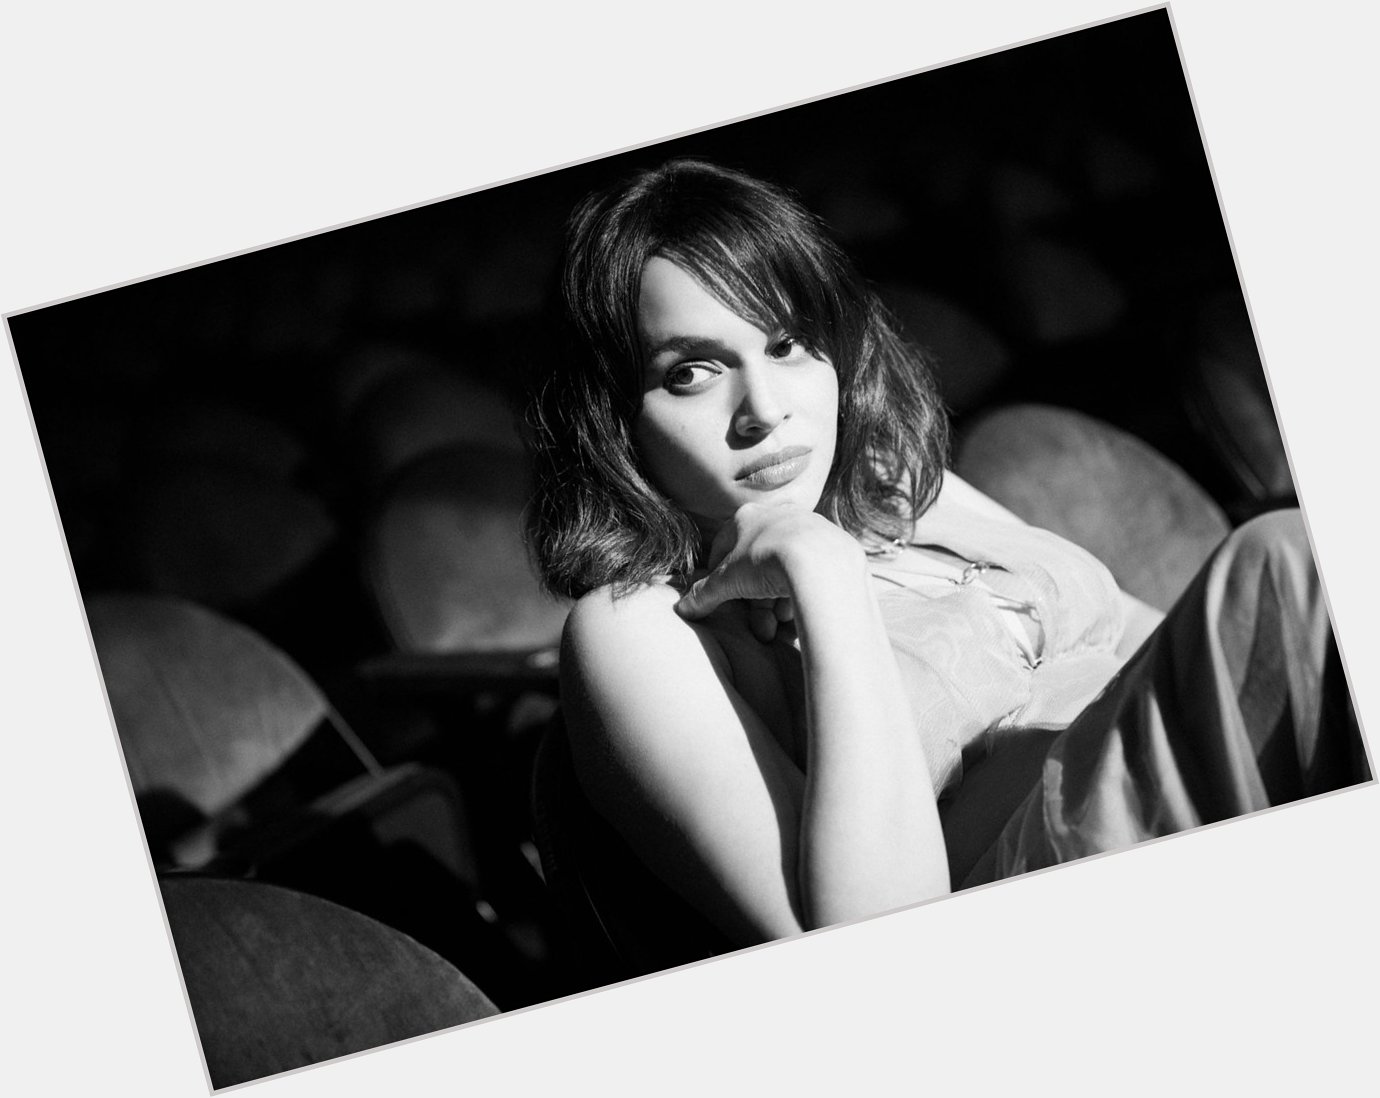 A very happy 42nd birthday to the talented Norah Jones, born this day in 1979.  